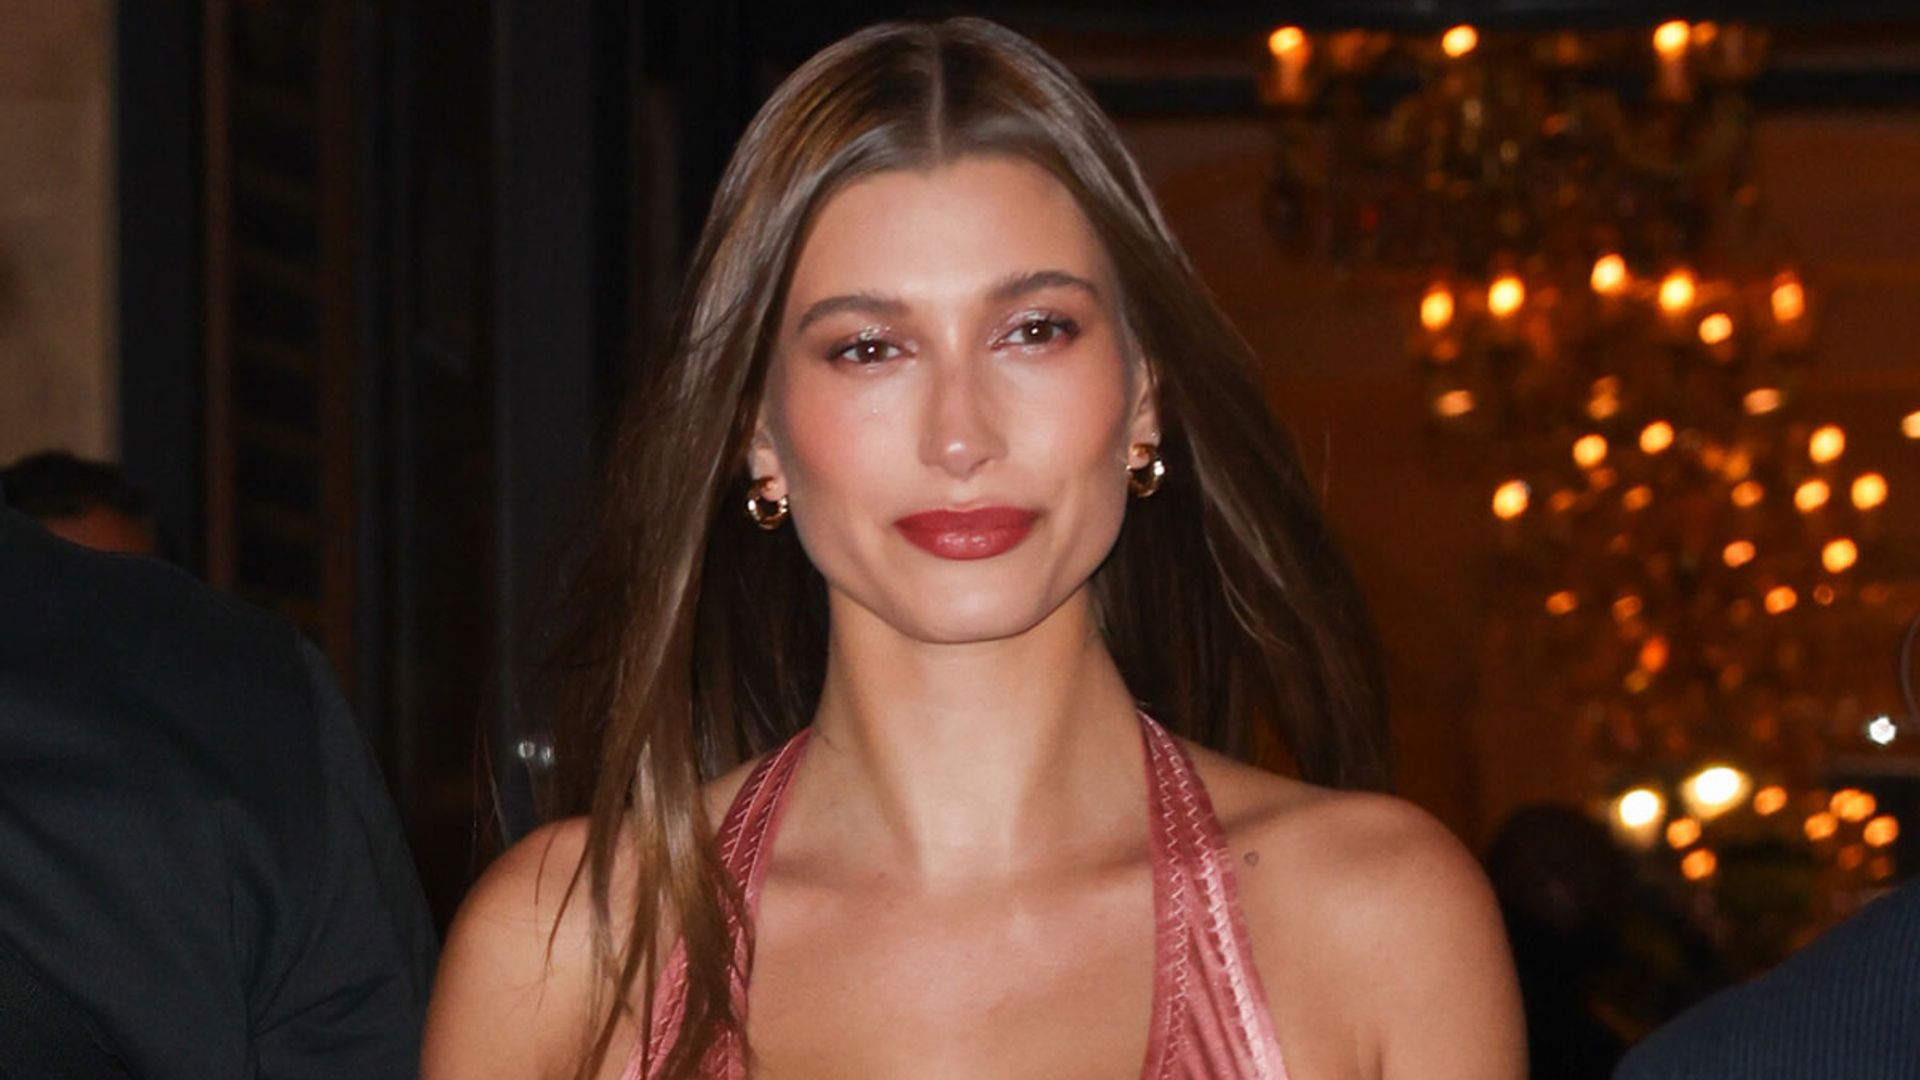 Hailey Bieber wows fans with sensational lingerie shots as she recovers from blood clot